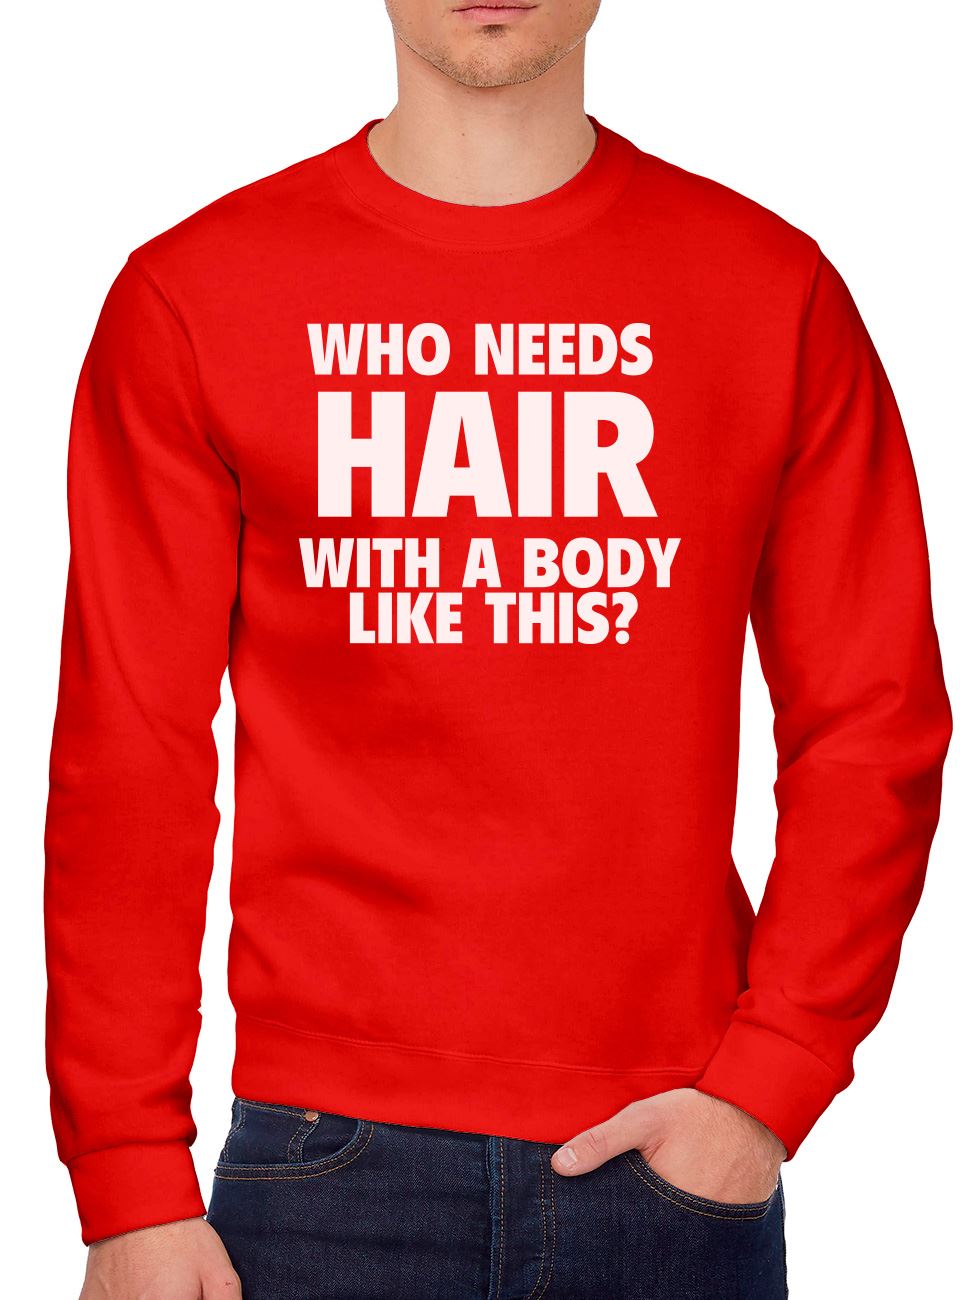 Who Needs Hair With a Body Like This - Mens Sweatshirt